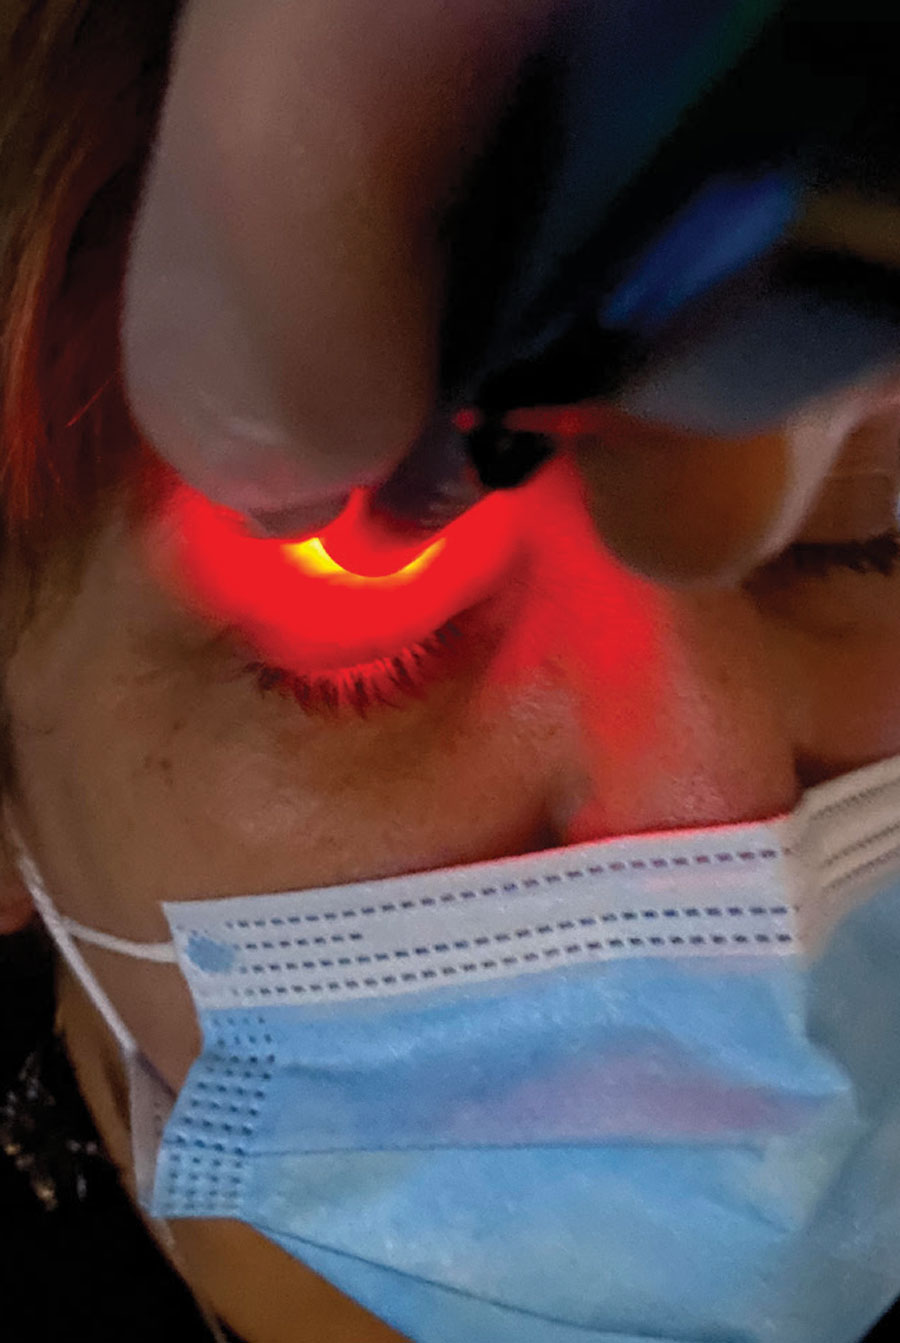 The Korb-Blackie light test can detect ILS by determining if the patient’s closed lids are protecting the ocular surface and preventing evaporation during sleep.